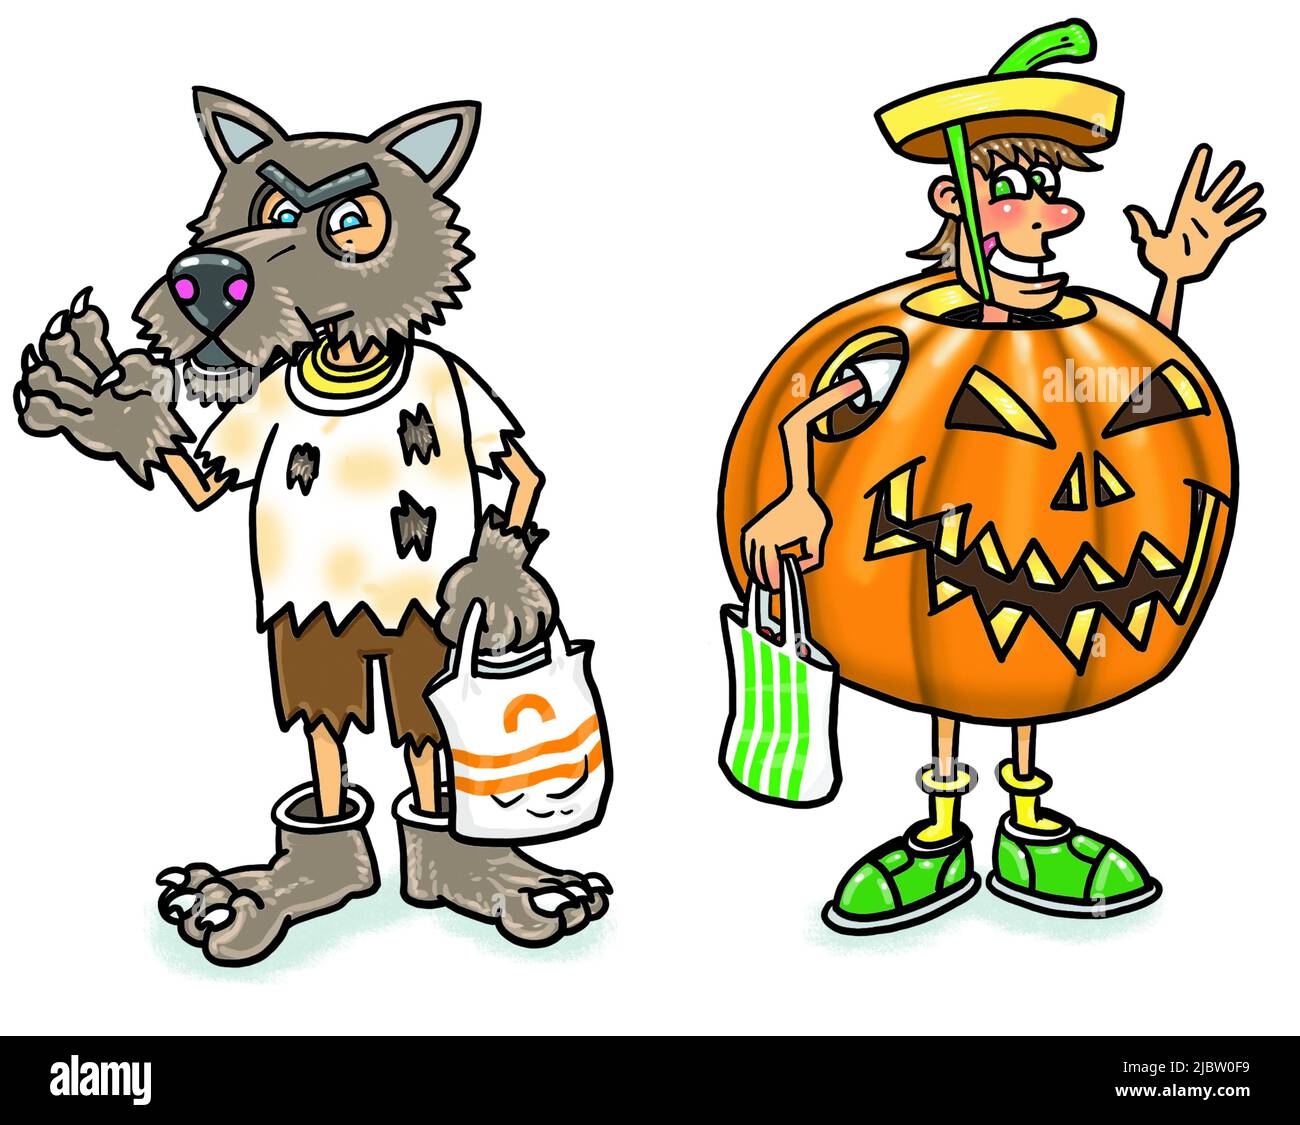 Cartoon art two figures dressed in Halloween costumes ready to go trick or treating, seasonal fun, Autumn events, playing dress-u, fancy dress costume Stock Photo